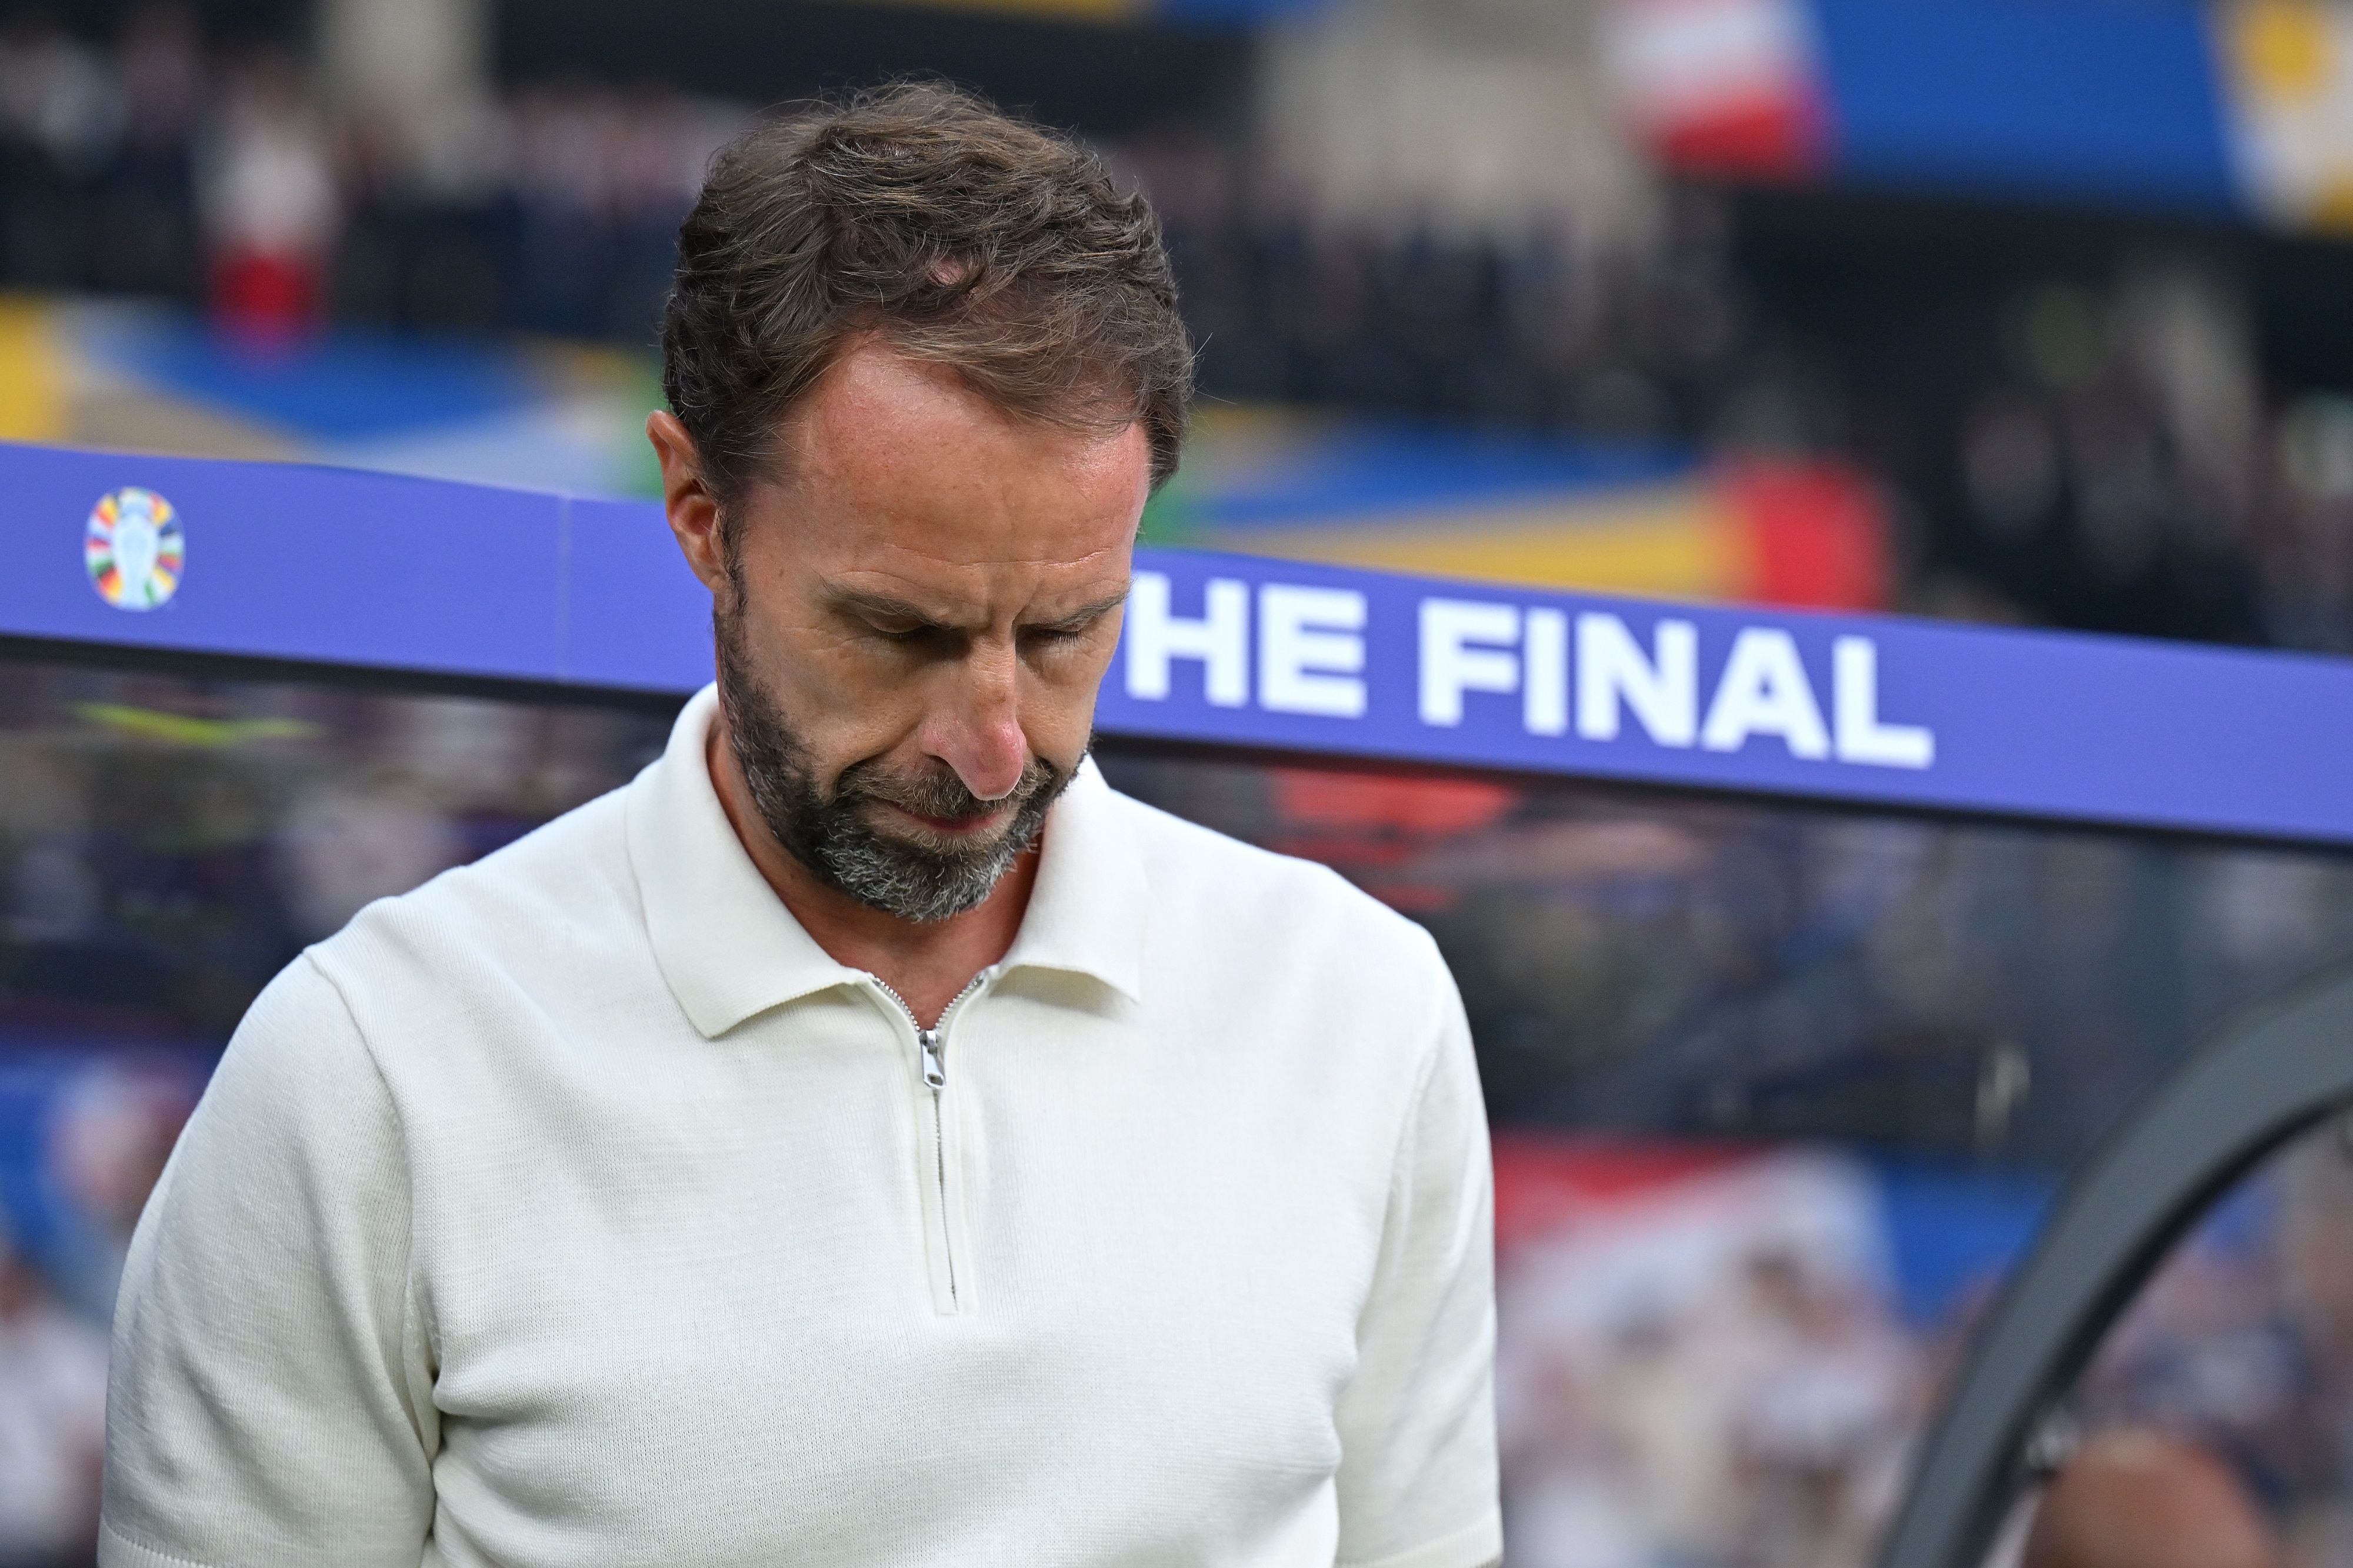 Gareth Southgate steps down as England manager with immediate effect